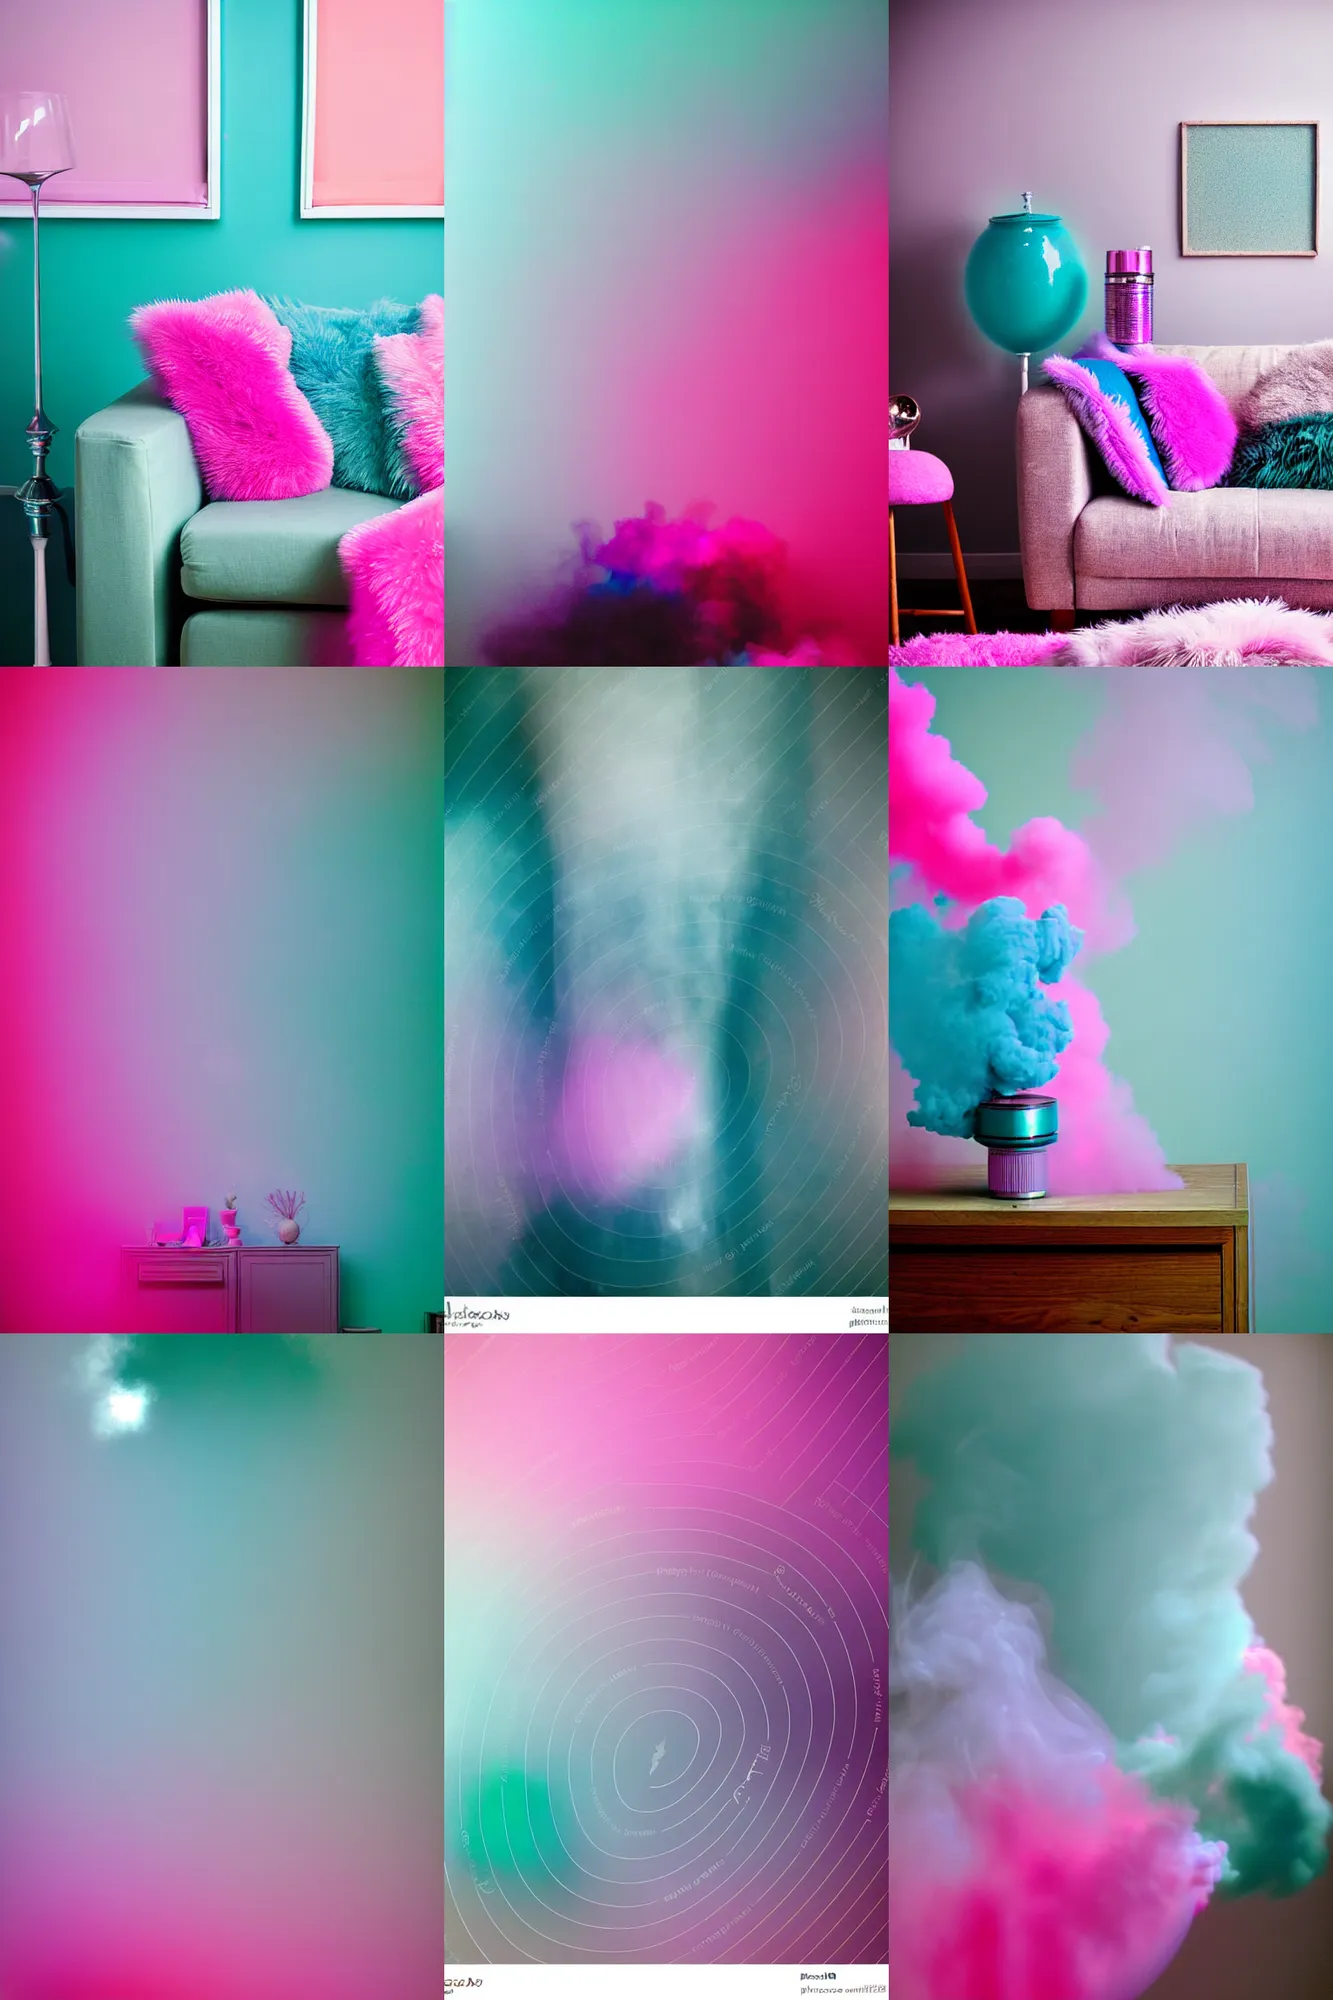 Prompt: teal and pink telephoto 7 0 mm f / 2. 8 iso 2 0 0 smoke iridescence refraction dust atmosphere volumetric photograph depicting chrysalism in a cosy cluttered living room